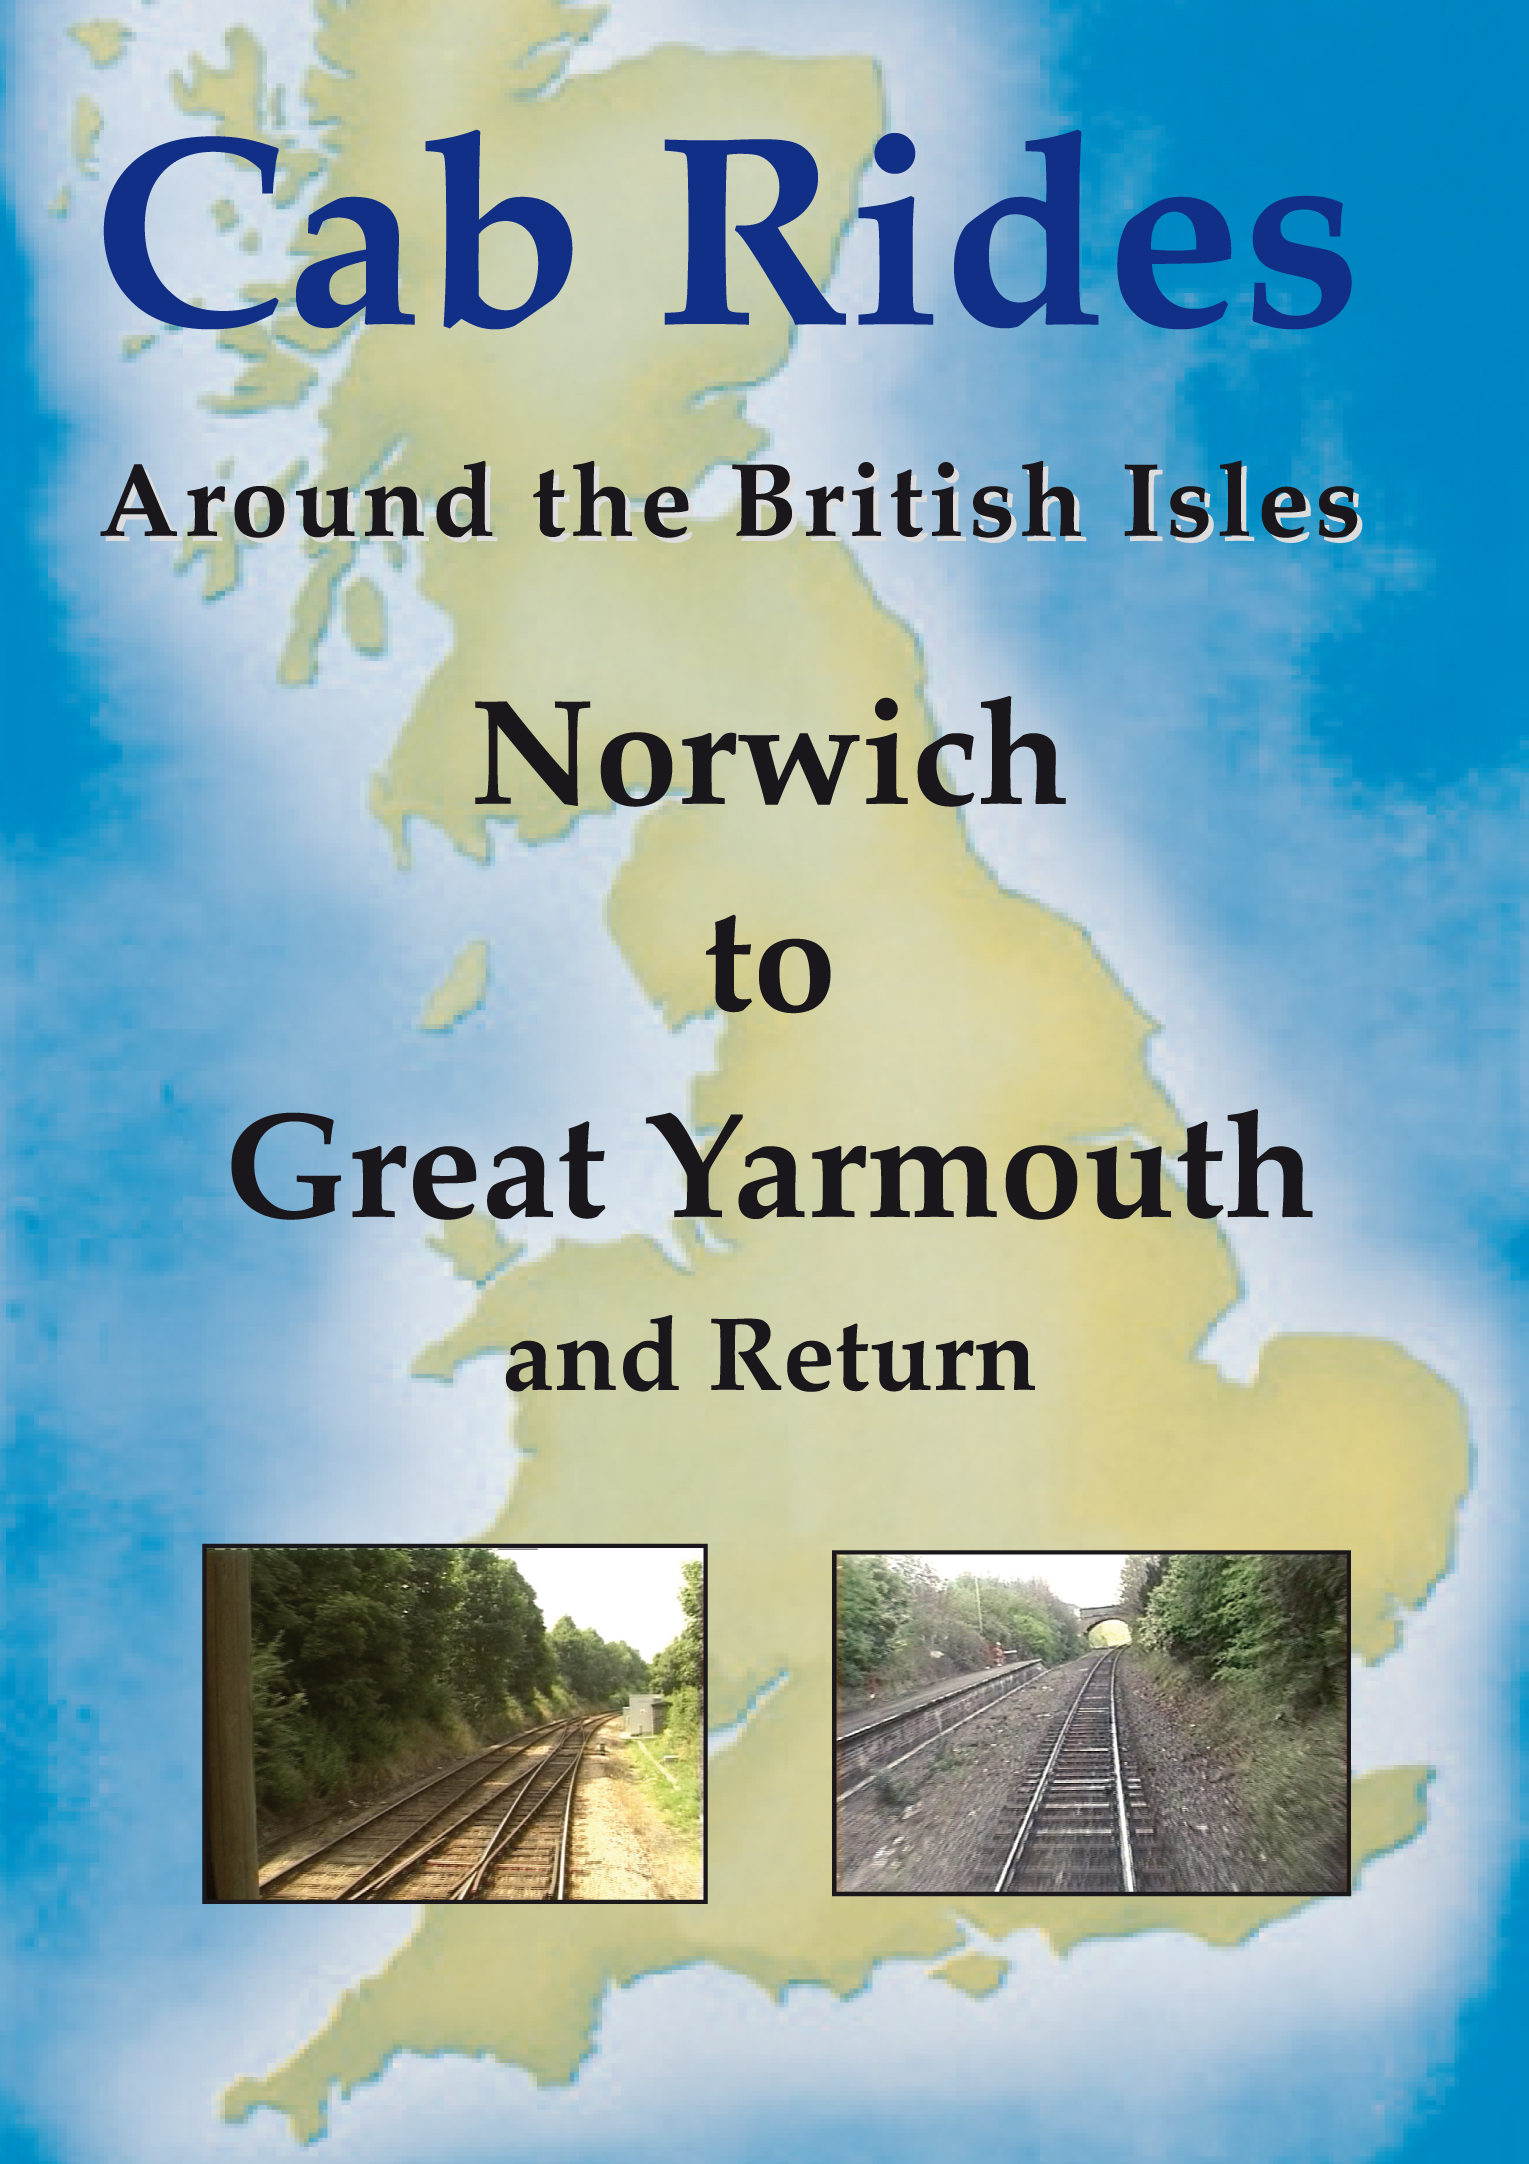 Cab Rides Around the British Isles: Norwich to Great Yarmouth and Return in 2001